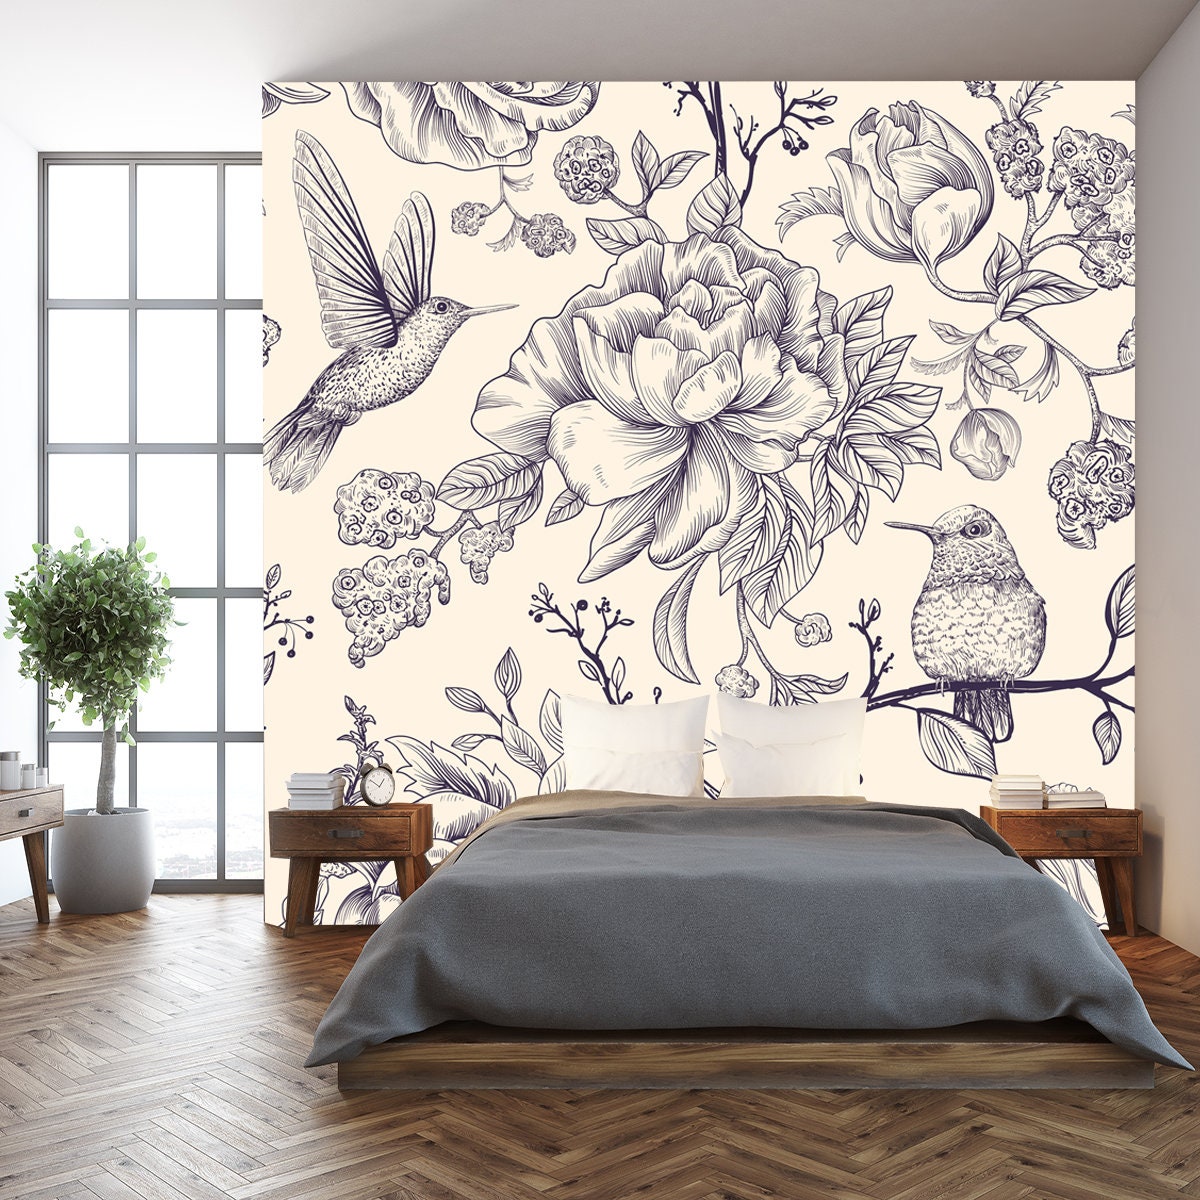 Sketch Pattern with Birds and Flowers. Hummingbirds and Flowers, Retro Style, Antique Backdrop Wallpaper Living Room Mural